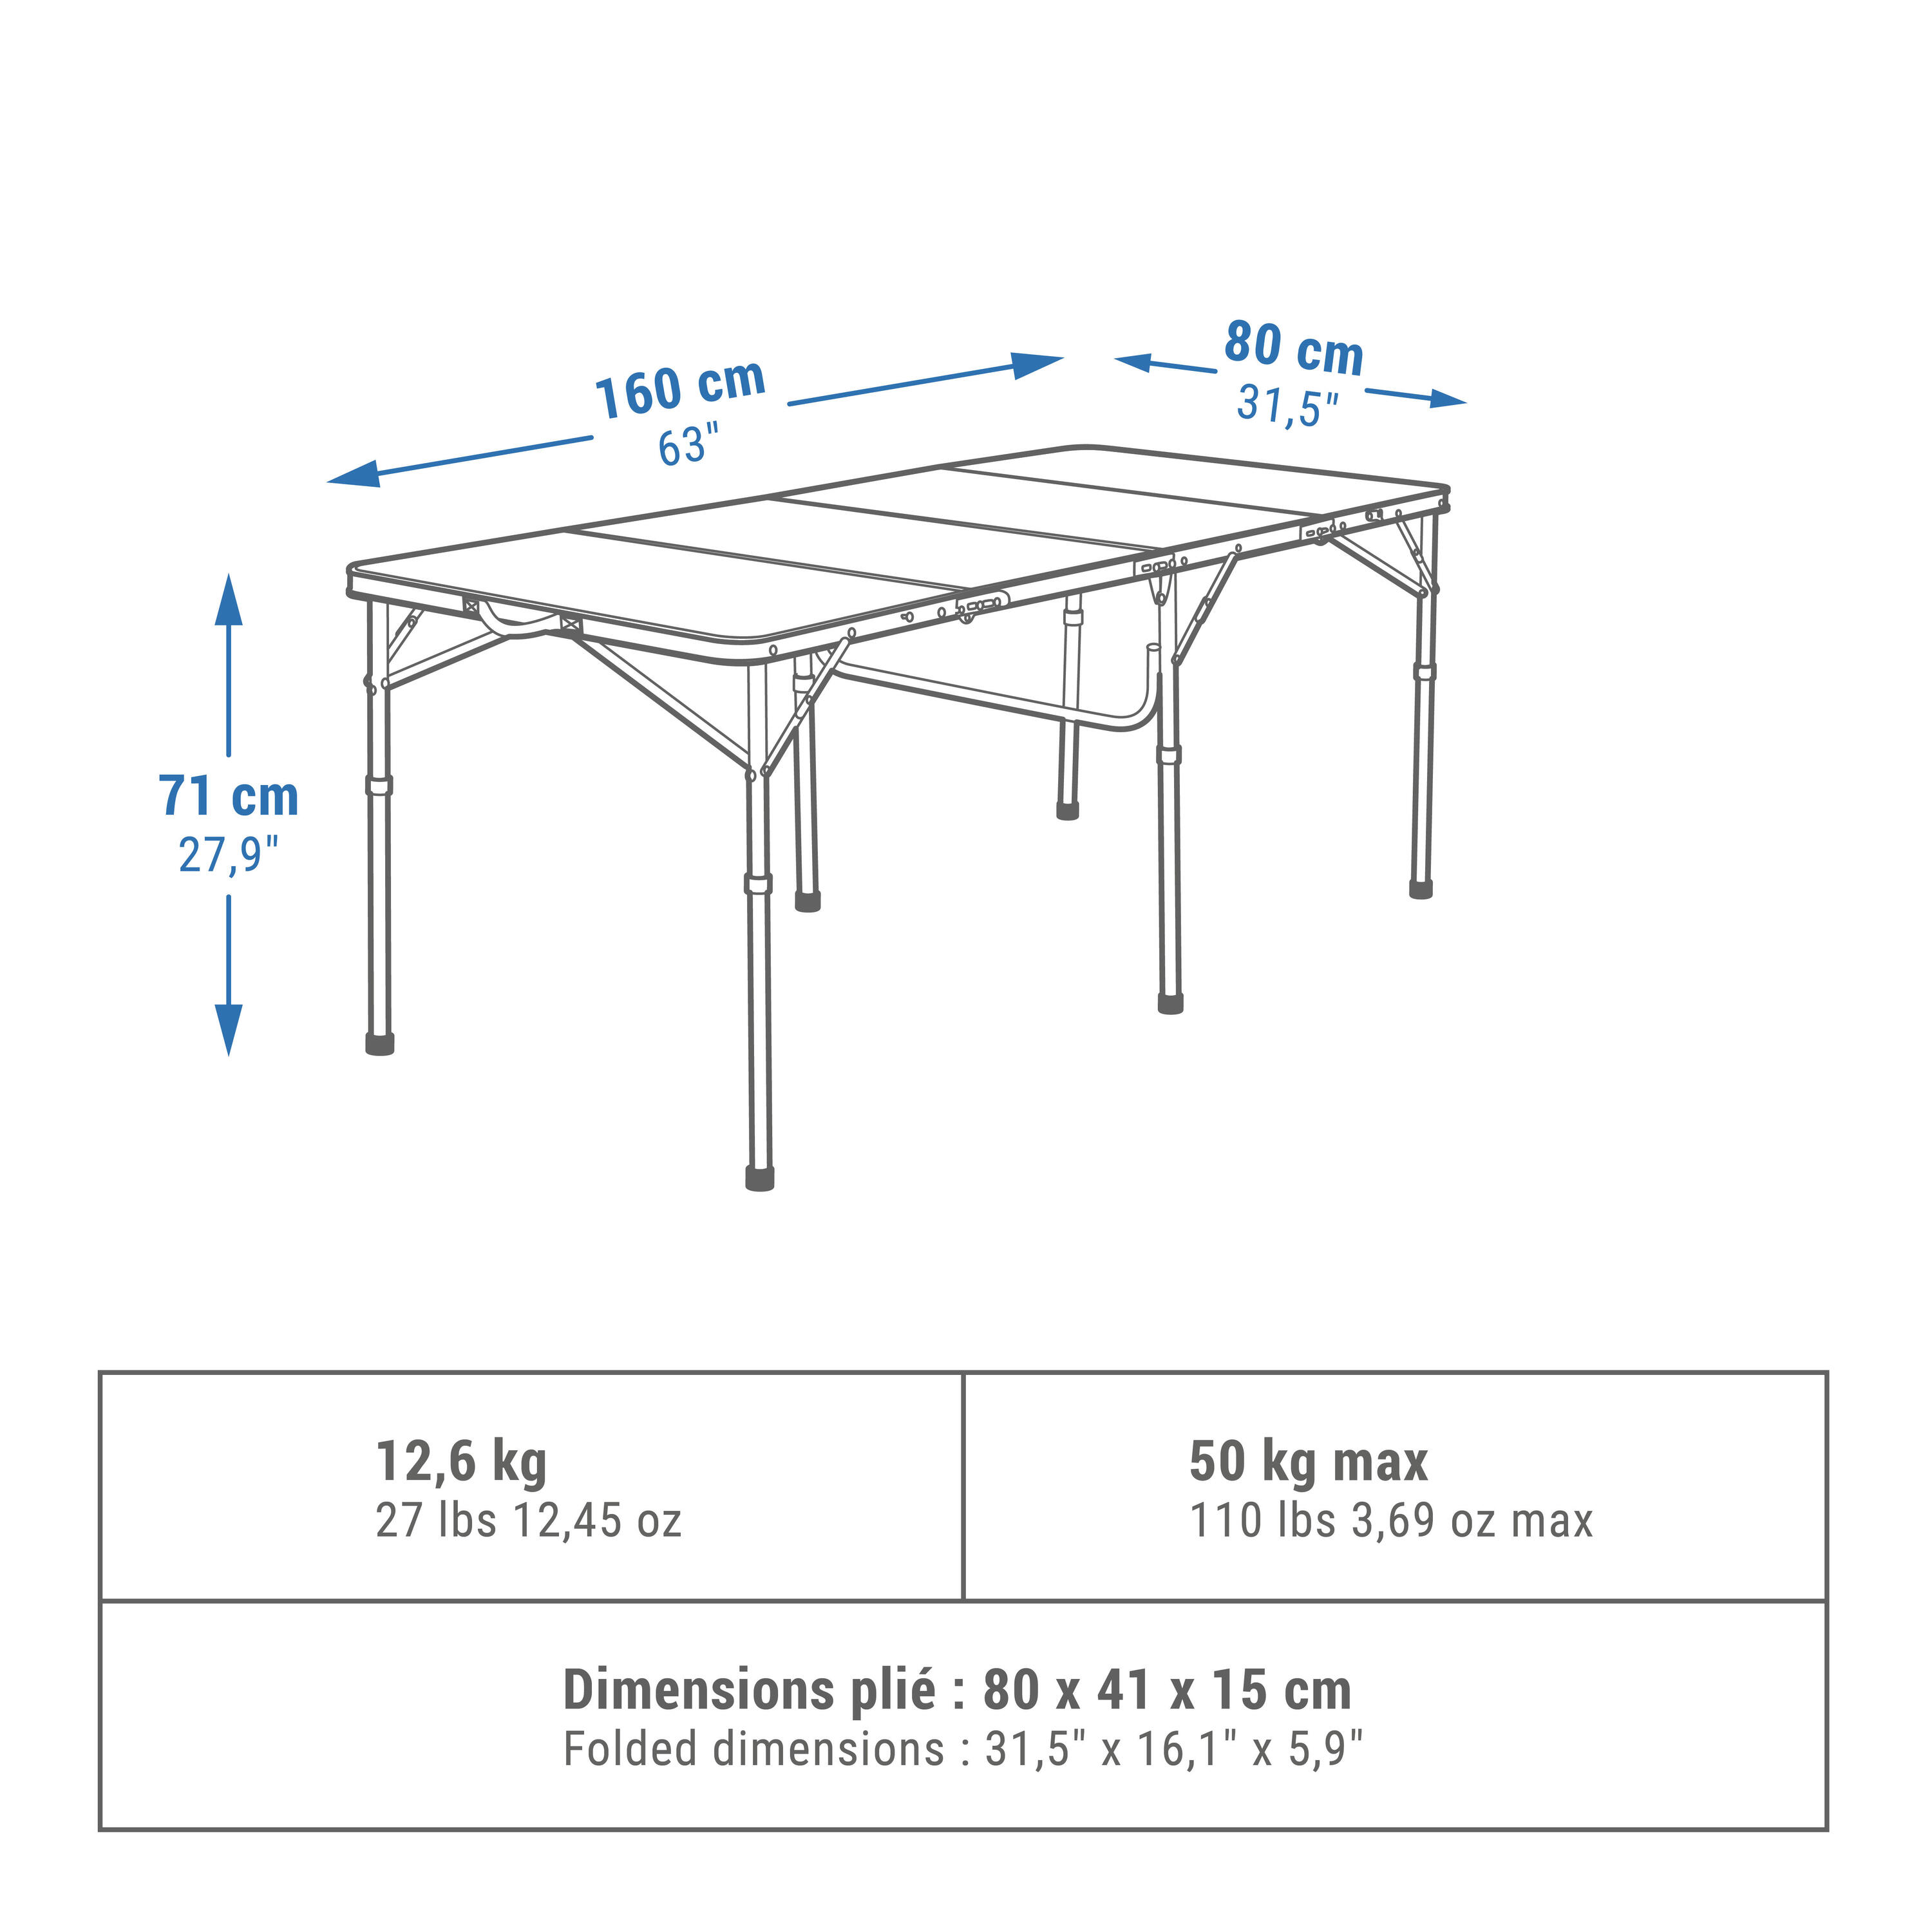 LARGE FOLDING CAMPING TABLE – 6 TO 8 PEOPLE 2/10